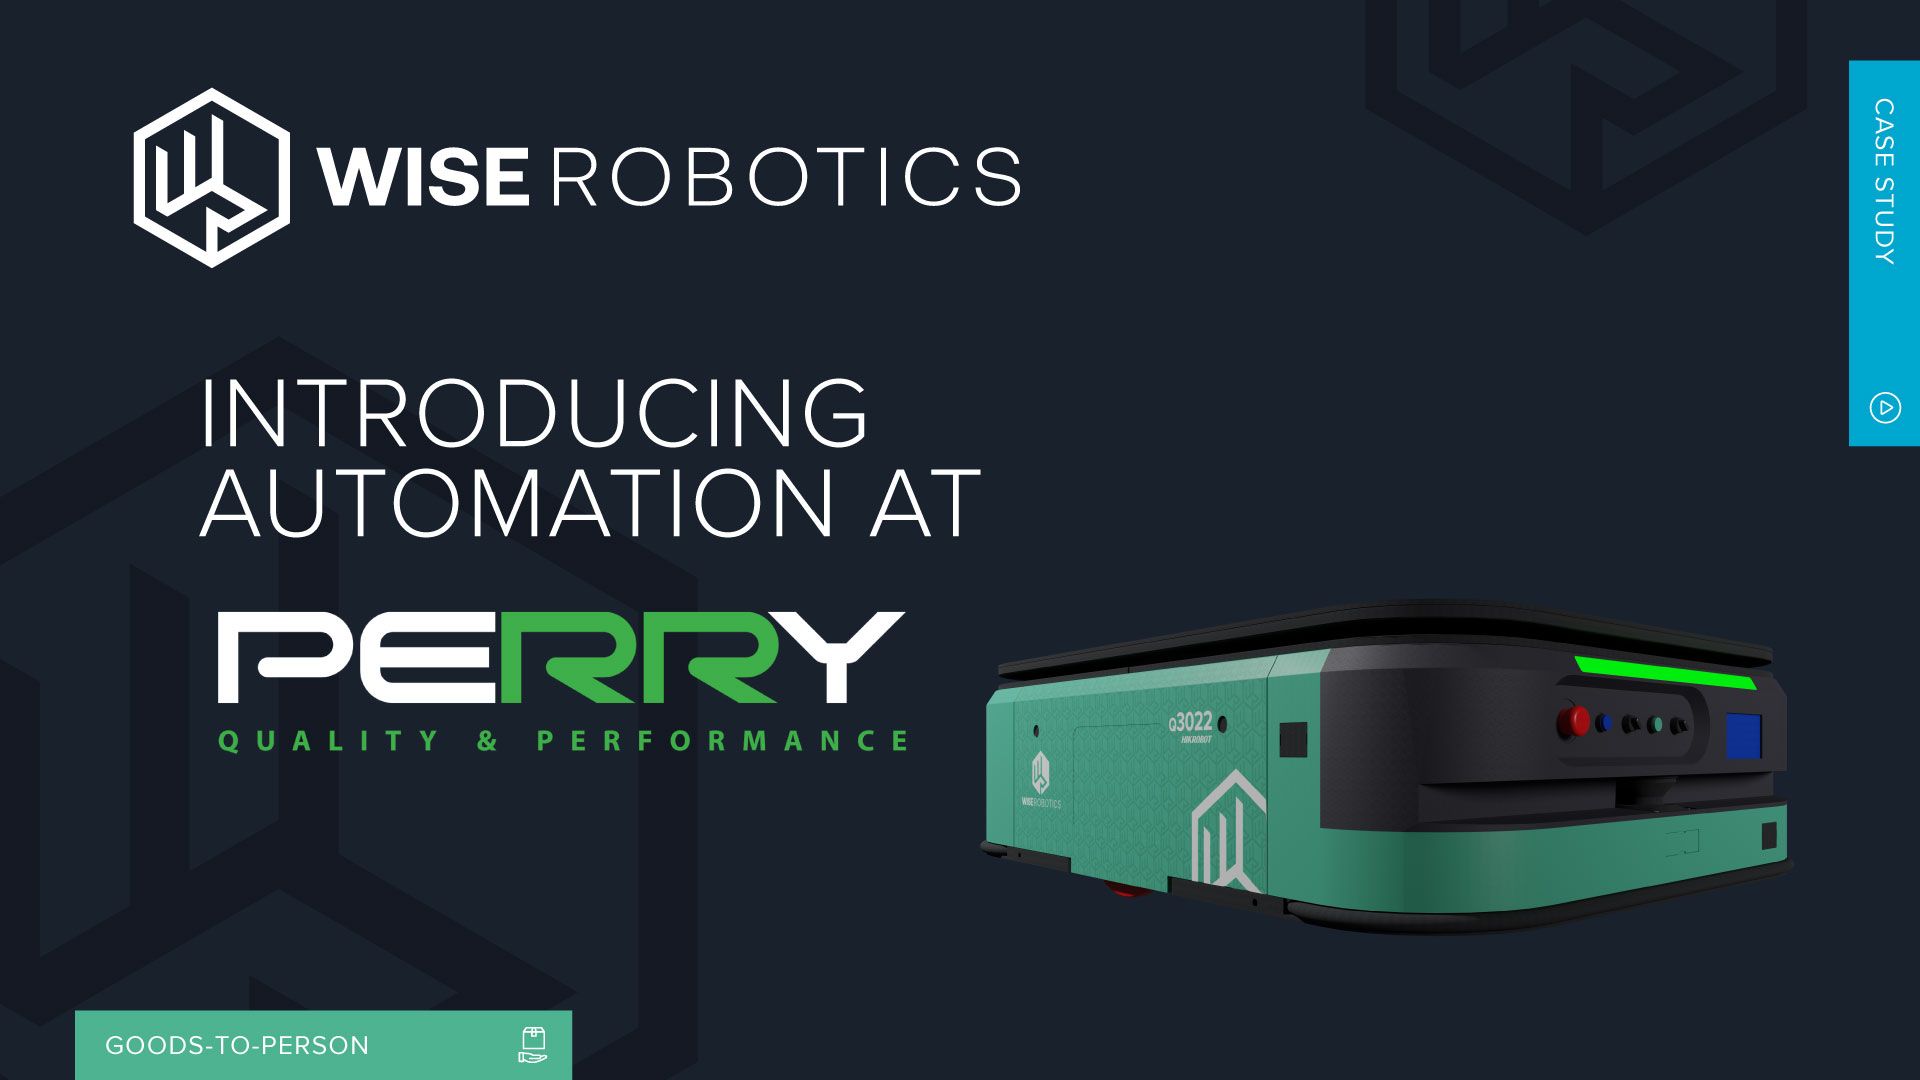 Introducing Automation at Perry - Wise Robotics